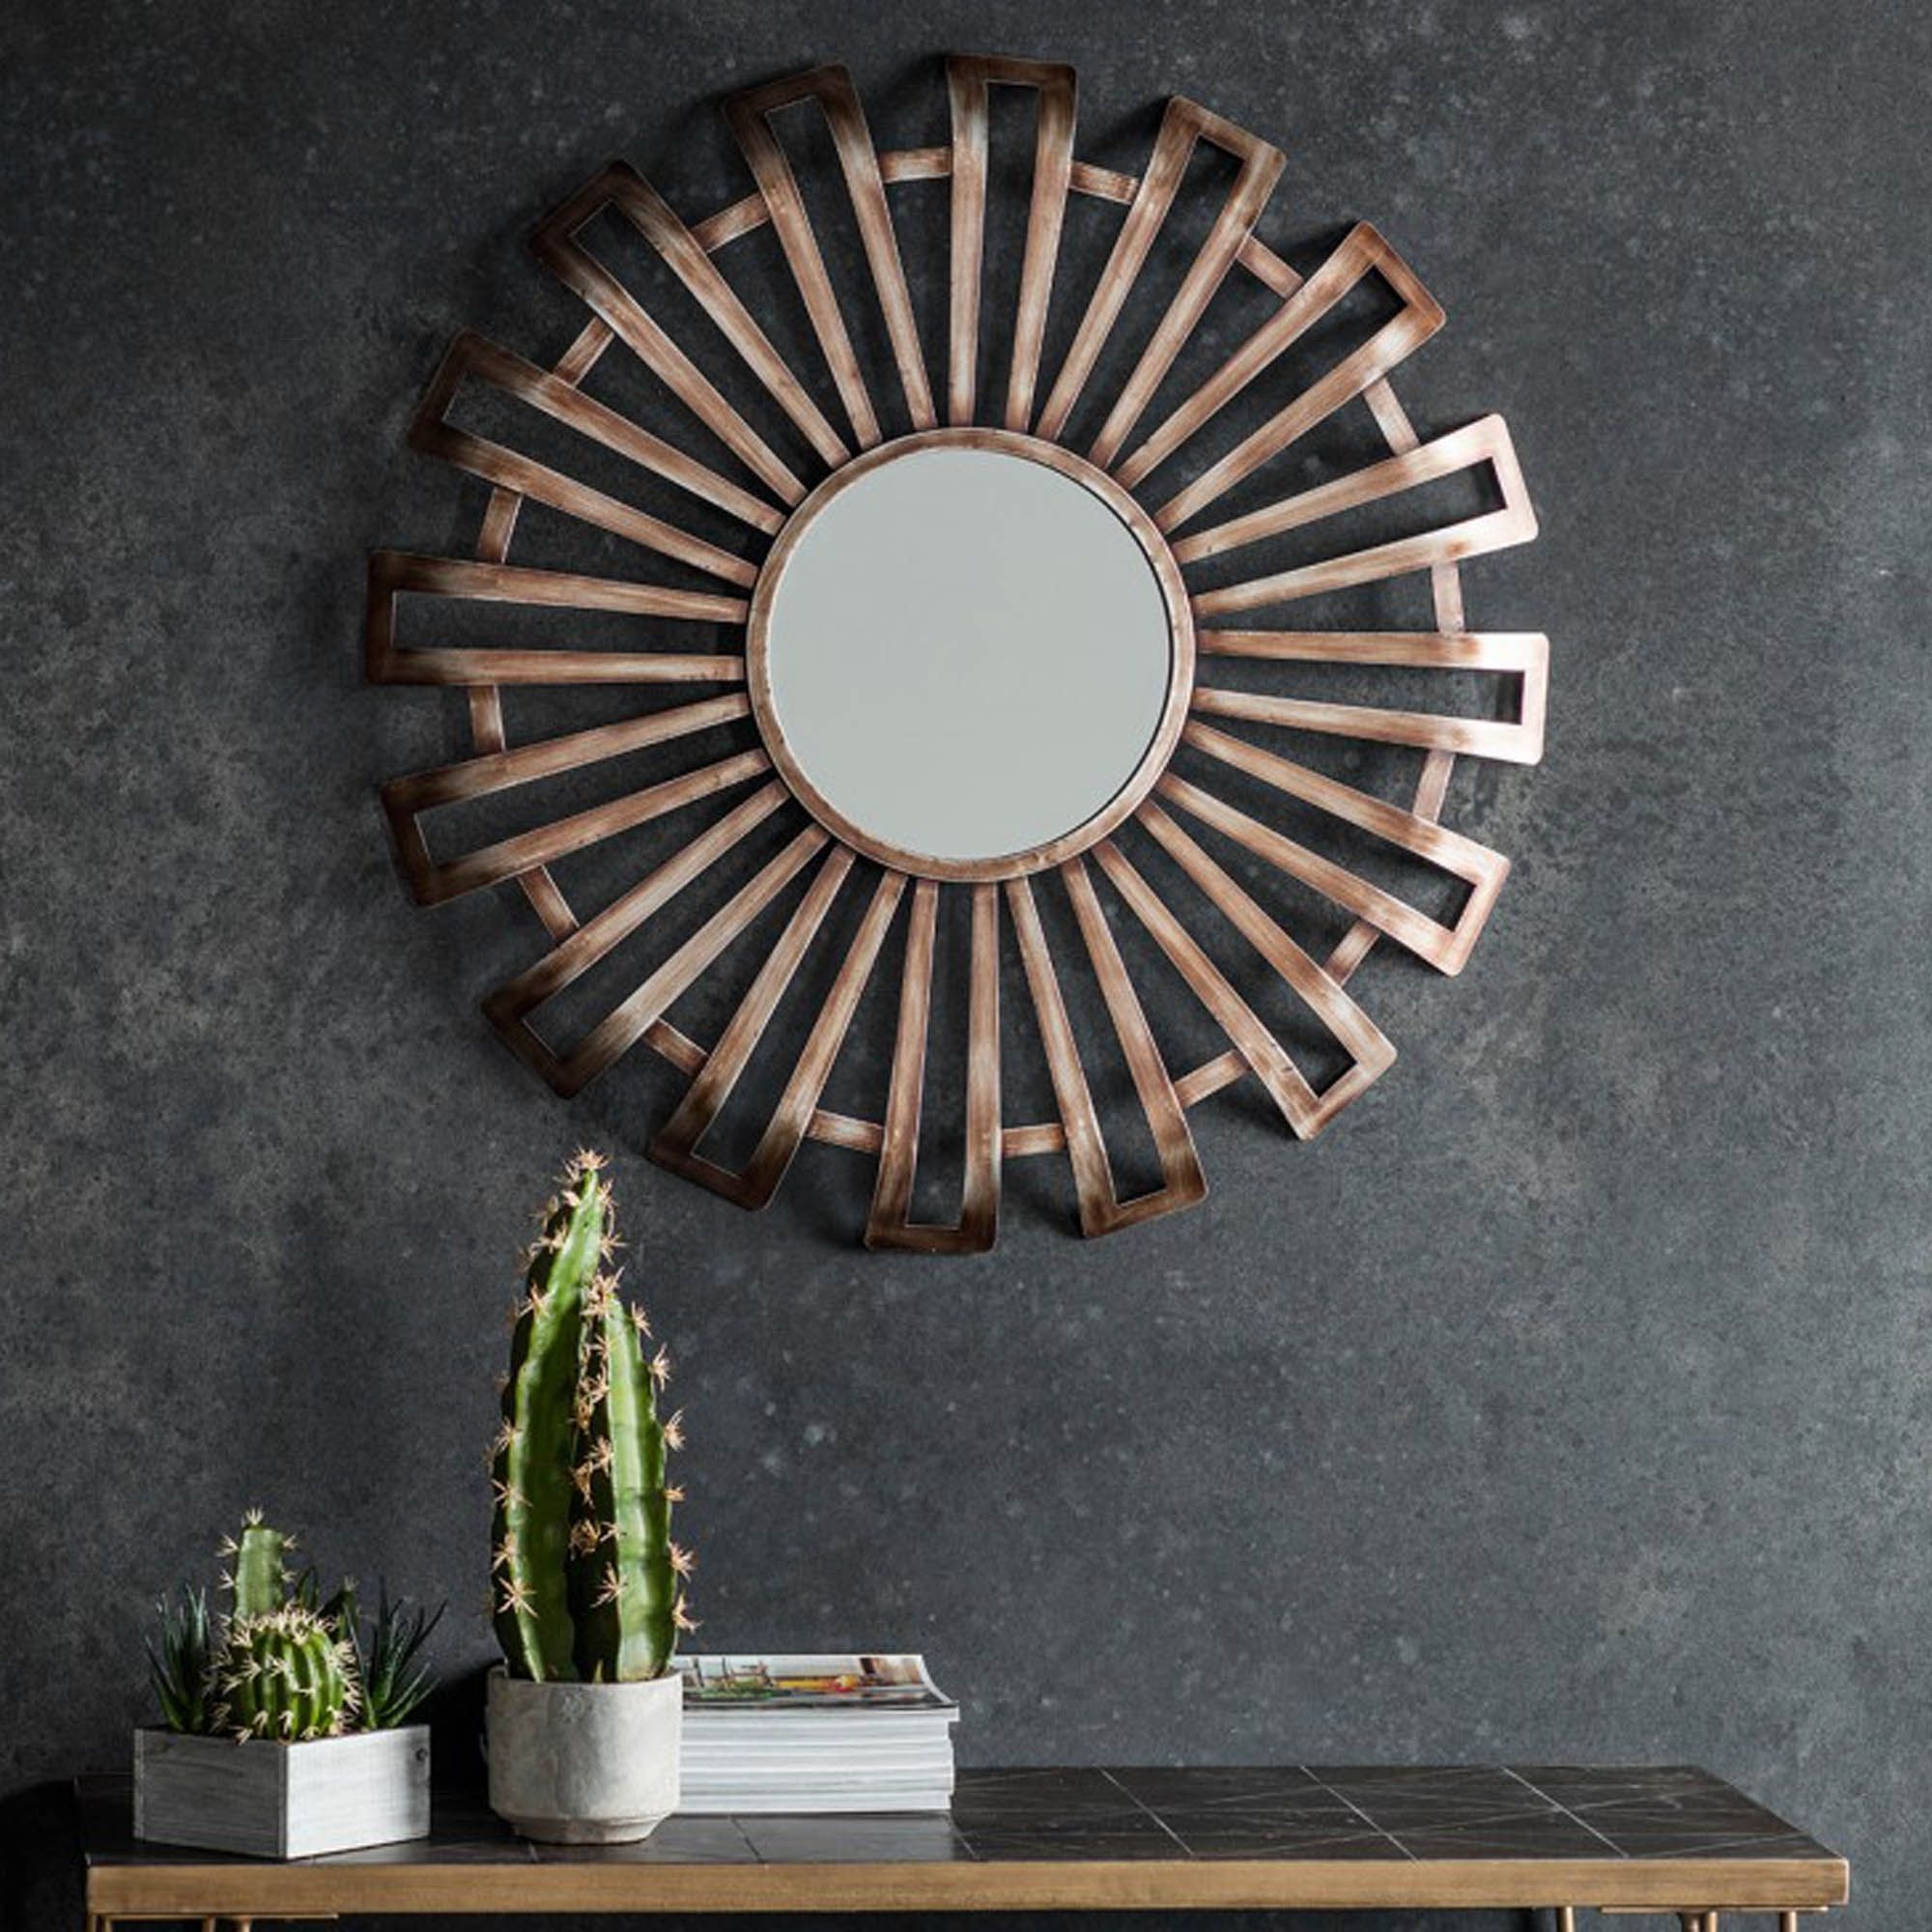 Preferred Nixon Round Wall Mirror Intended For Circle Wall Mirrors (View 7 of 20)